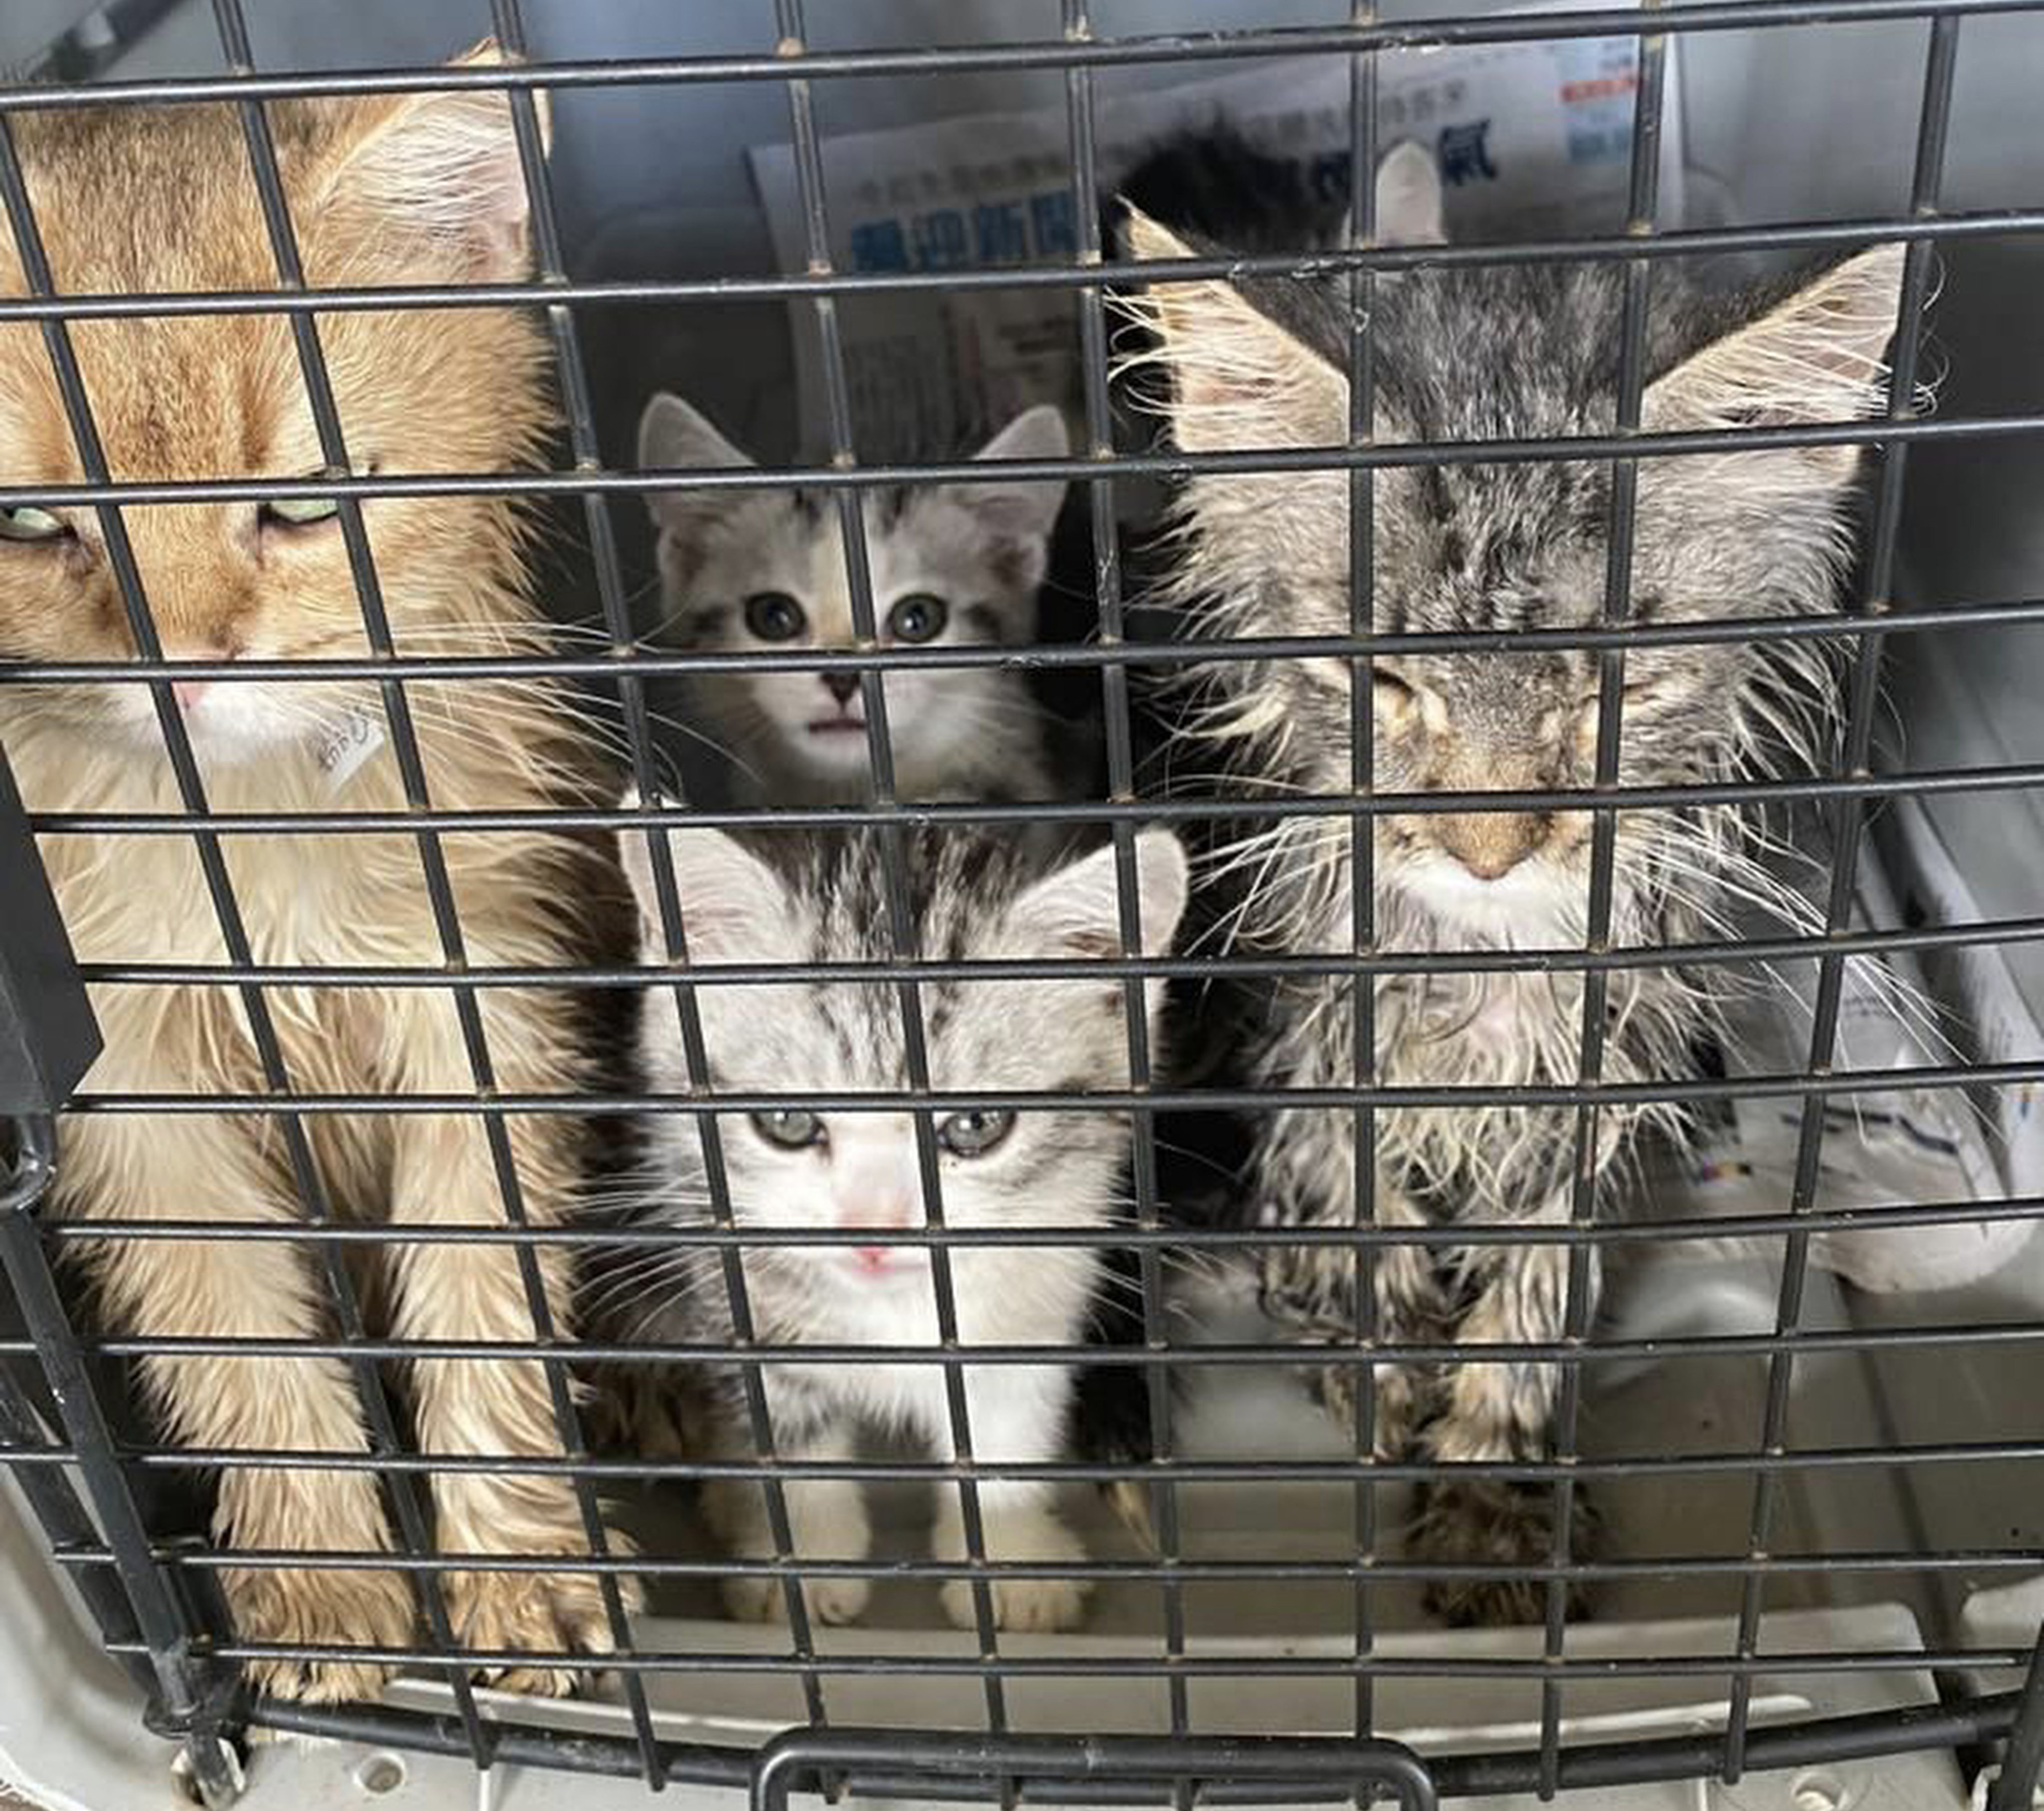 Puppies and kittens were rescued in a joint anti-smuggling operation in Ha Pak Lai in the early hours of Thursday. Photo: Handout